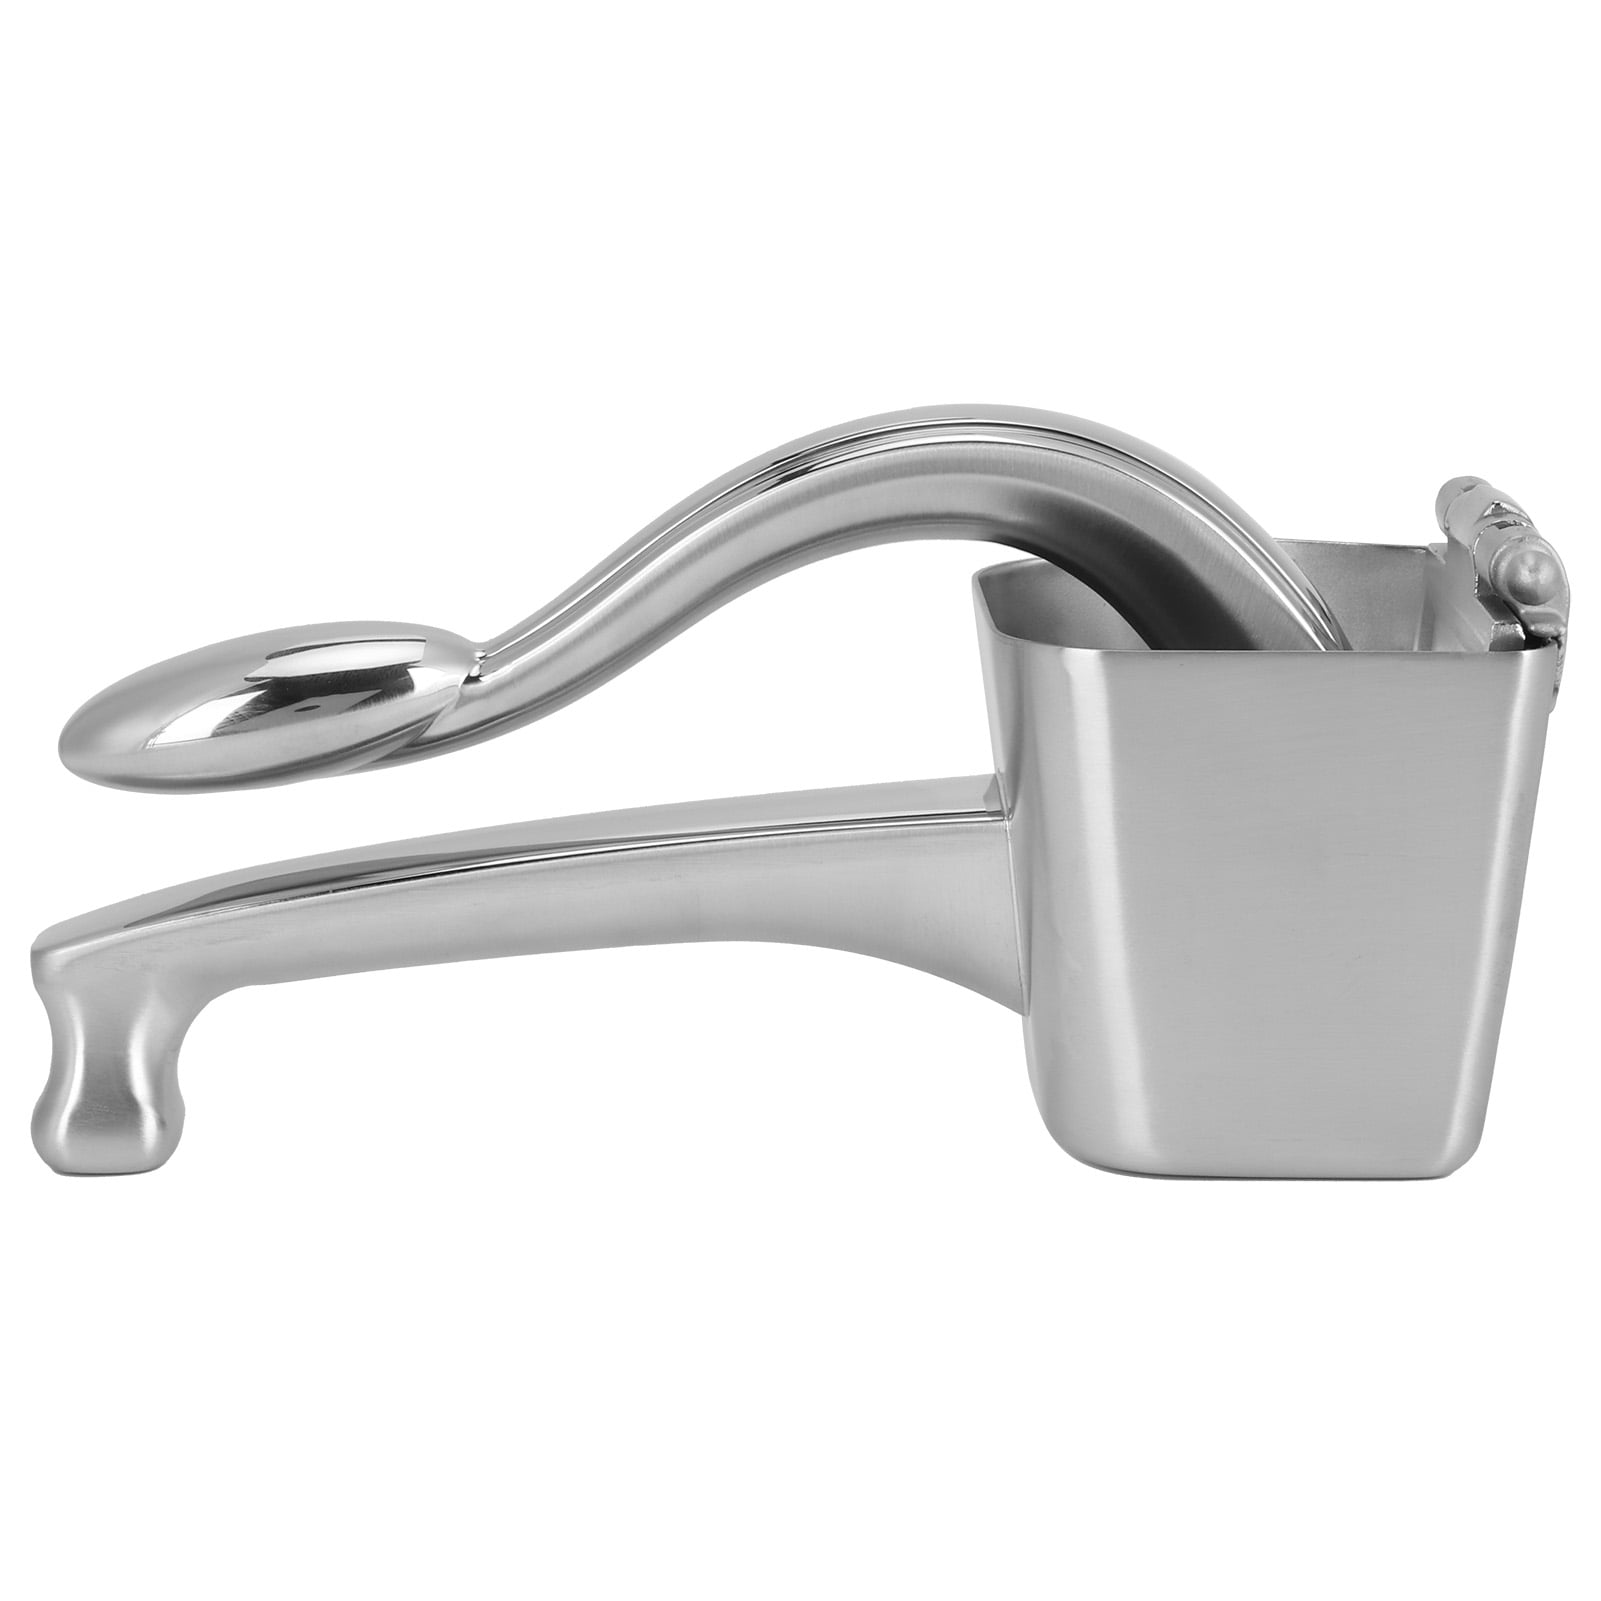 Star 37807 Stainless Steel Commercial French Fry Bagger Right Handle for sale online 